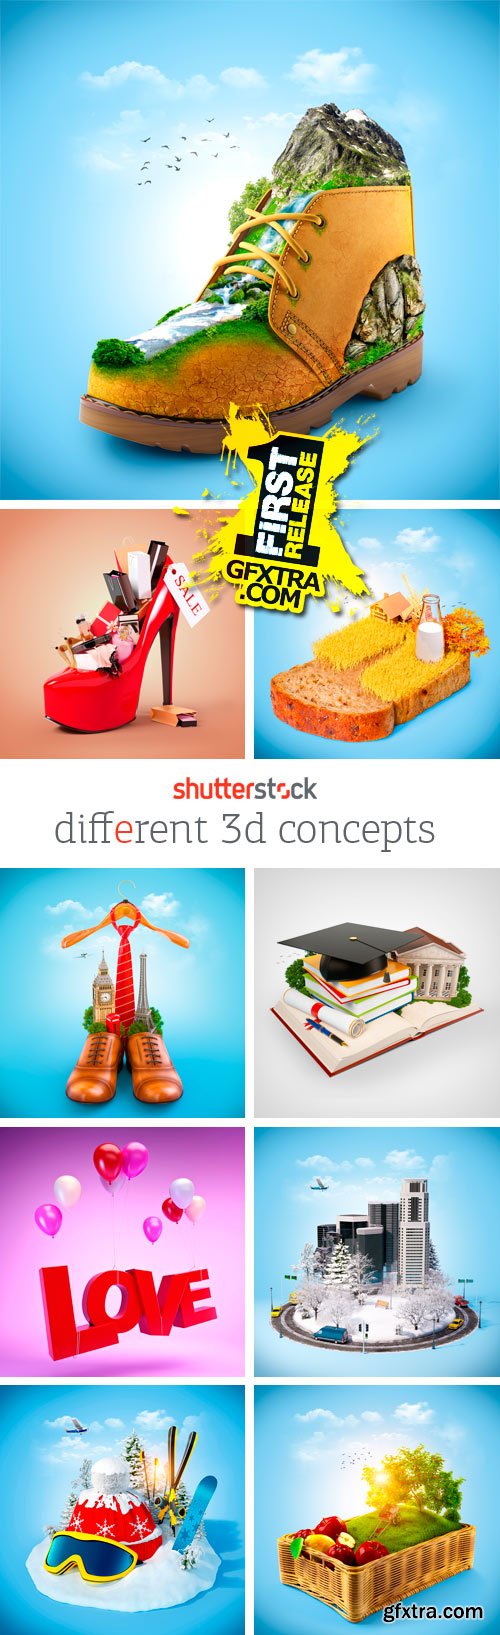 Amazing SS - Different 3D Concepts, 25xJPGs